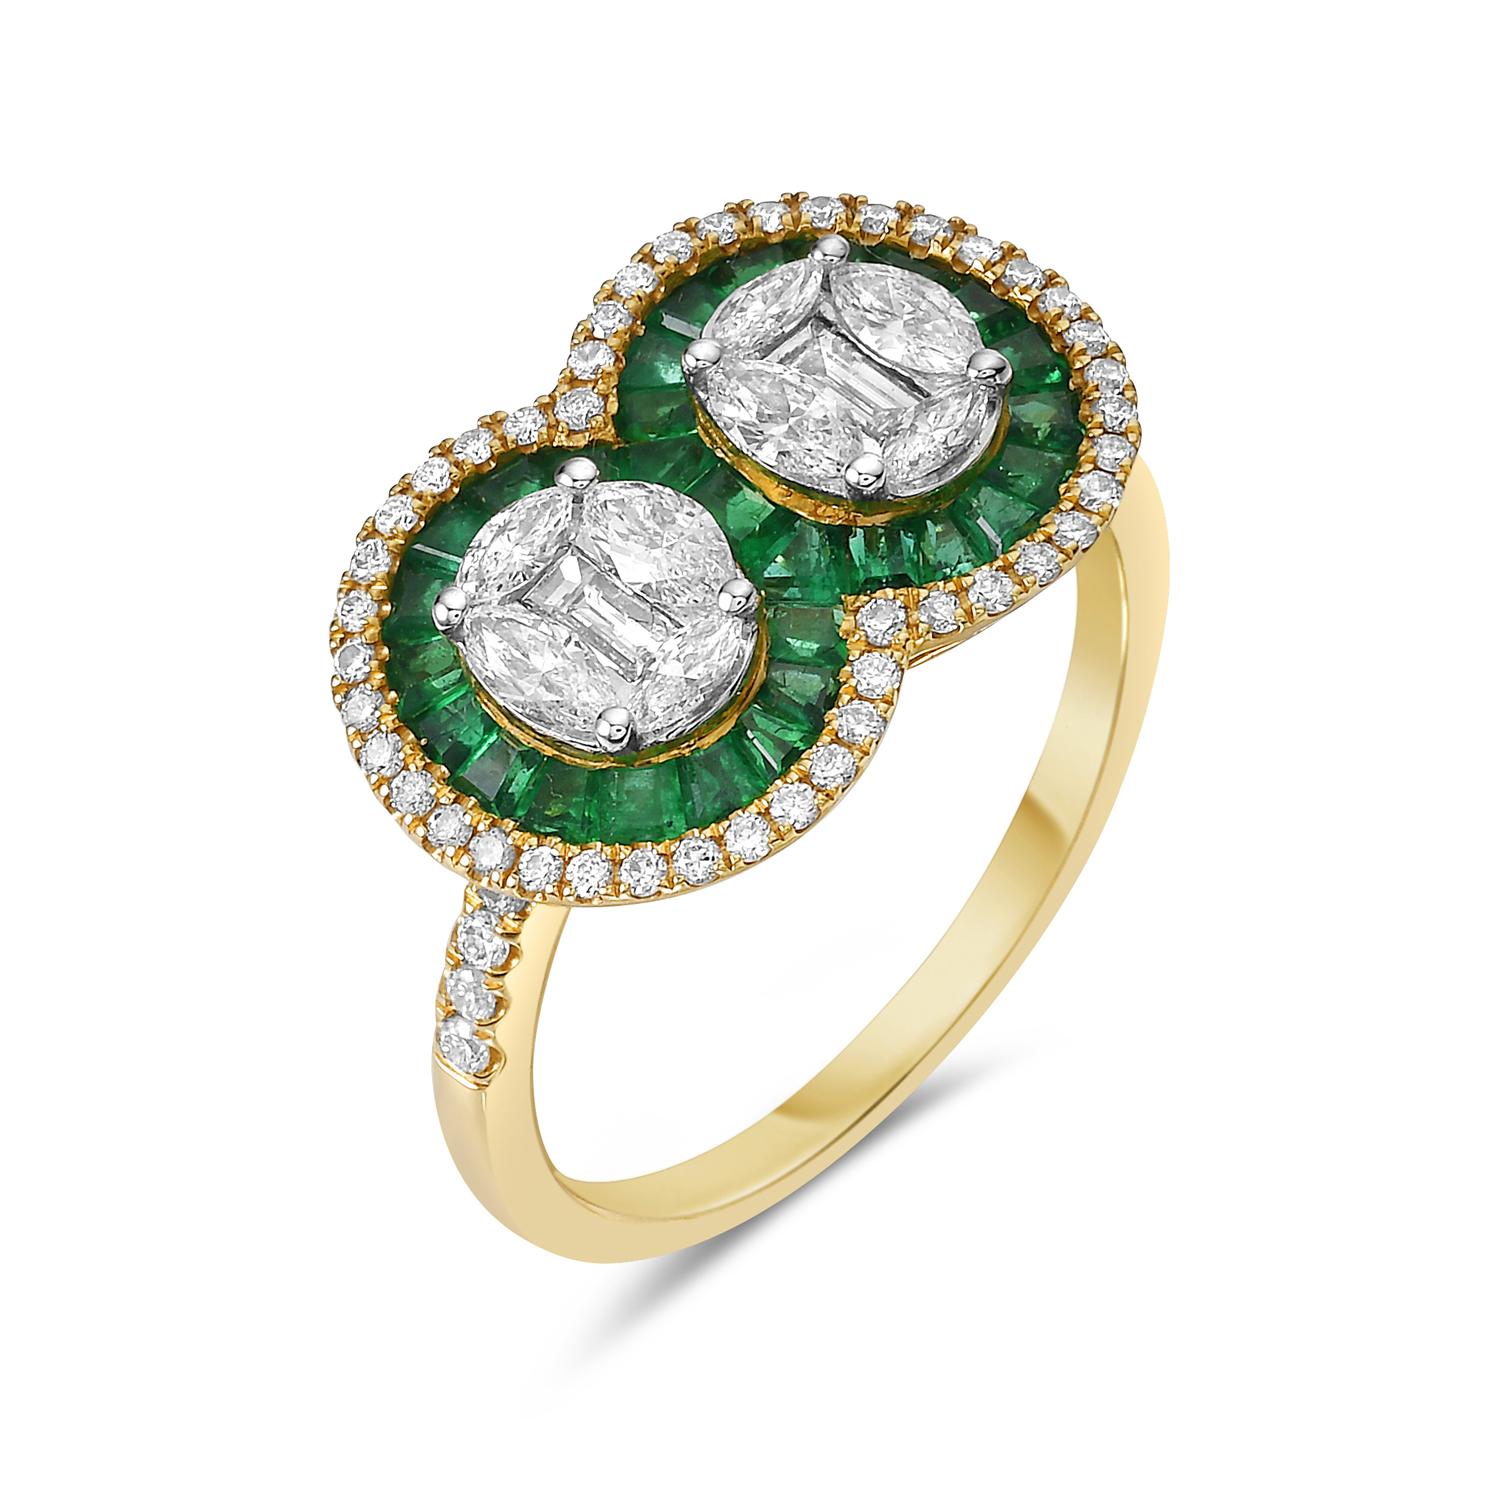 Contemporary Twin Ring With Emerald & Diamonds Made In 18k Gold For Sale